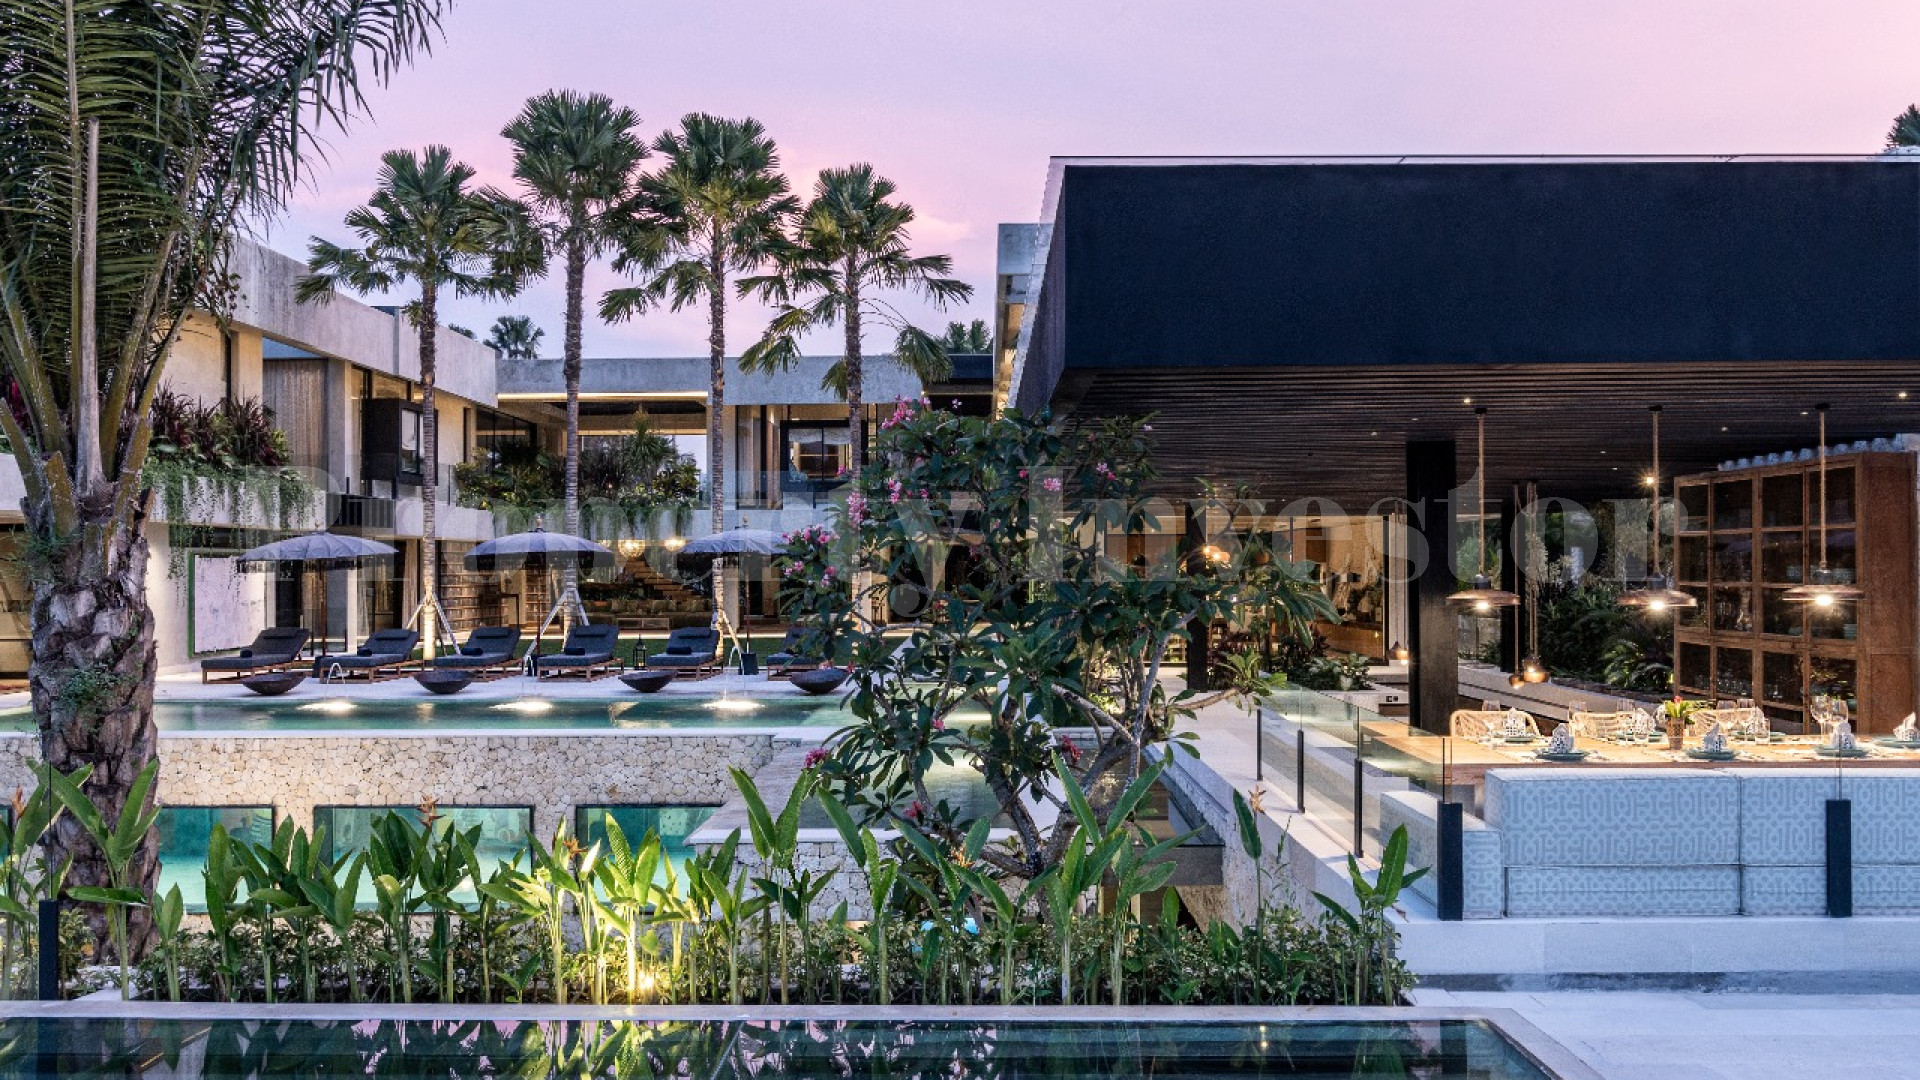 Brand-New 3-Storey Ultra Luxurious 15 Bedroom Villa with Incredible Terraces & Entertaining Spaces for Sale in Pererenan-Canggu, Bali